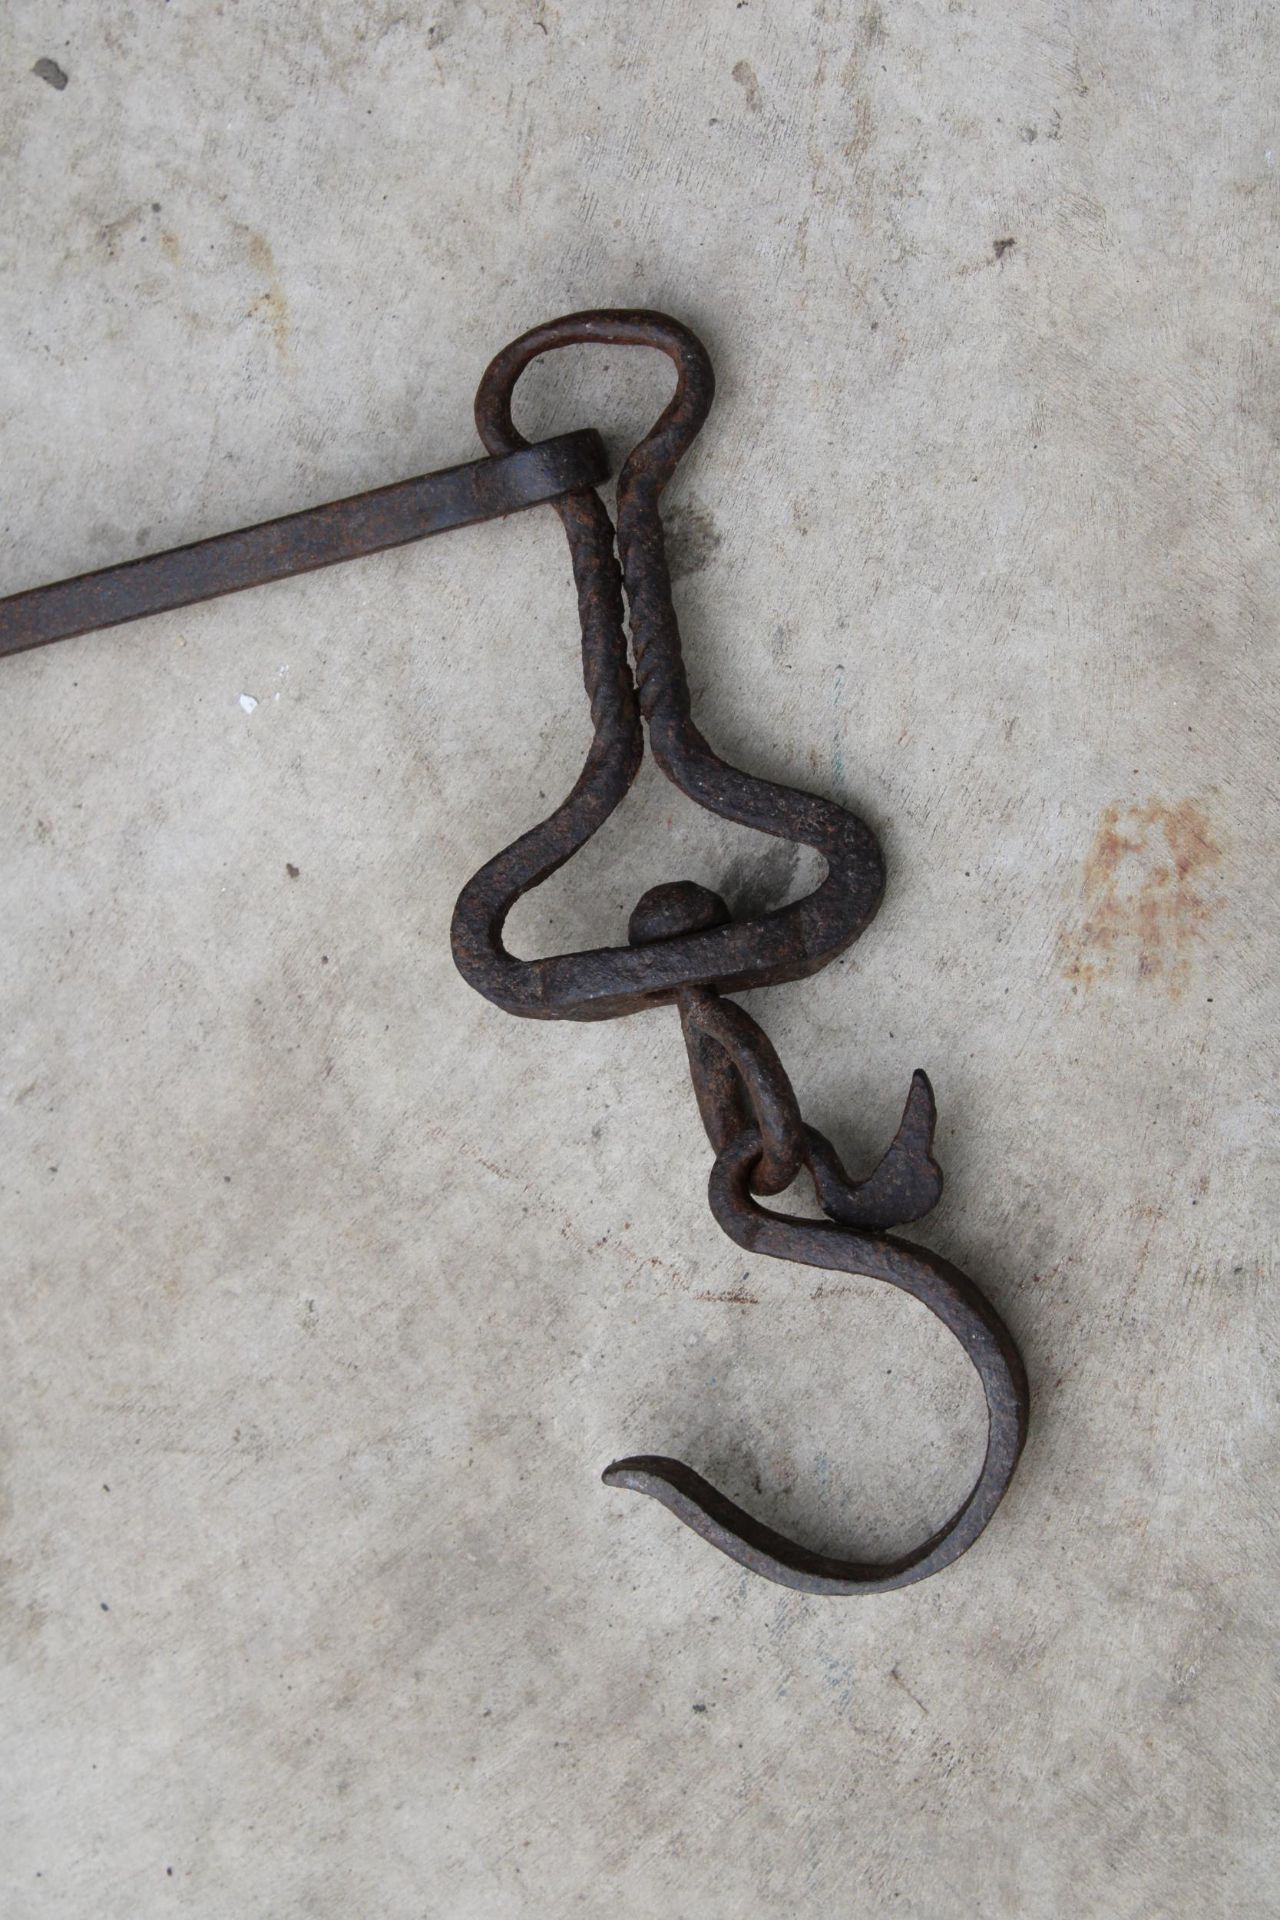 A VINTAGE SET OF IRON MERCANTILE SCALES - Image 3 of 4